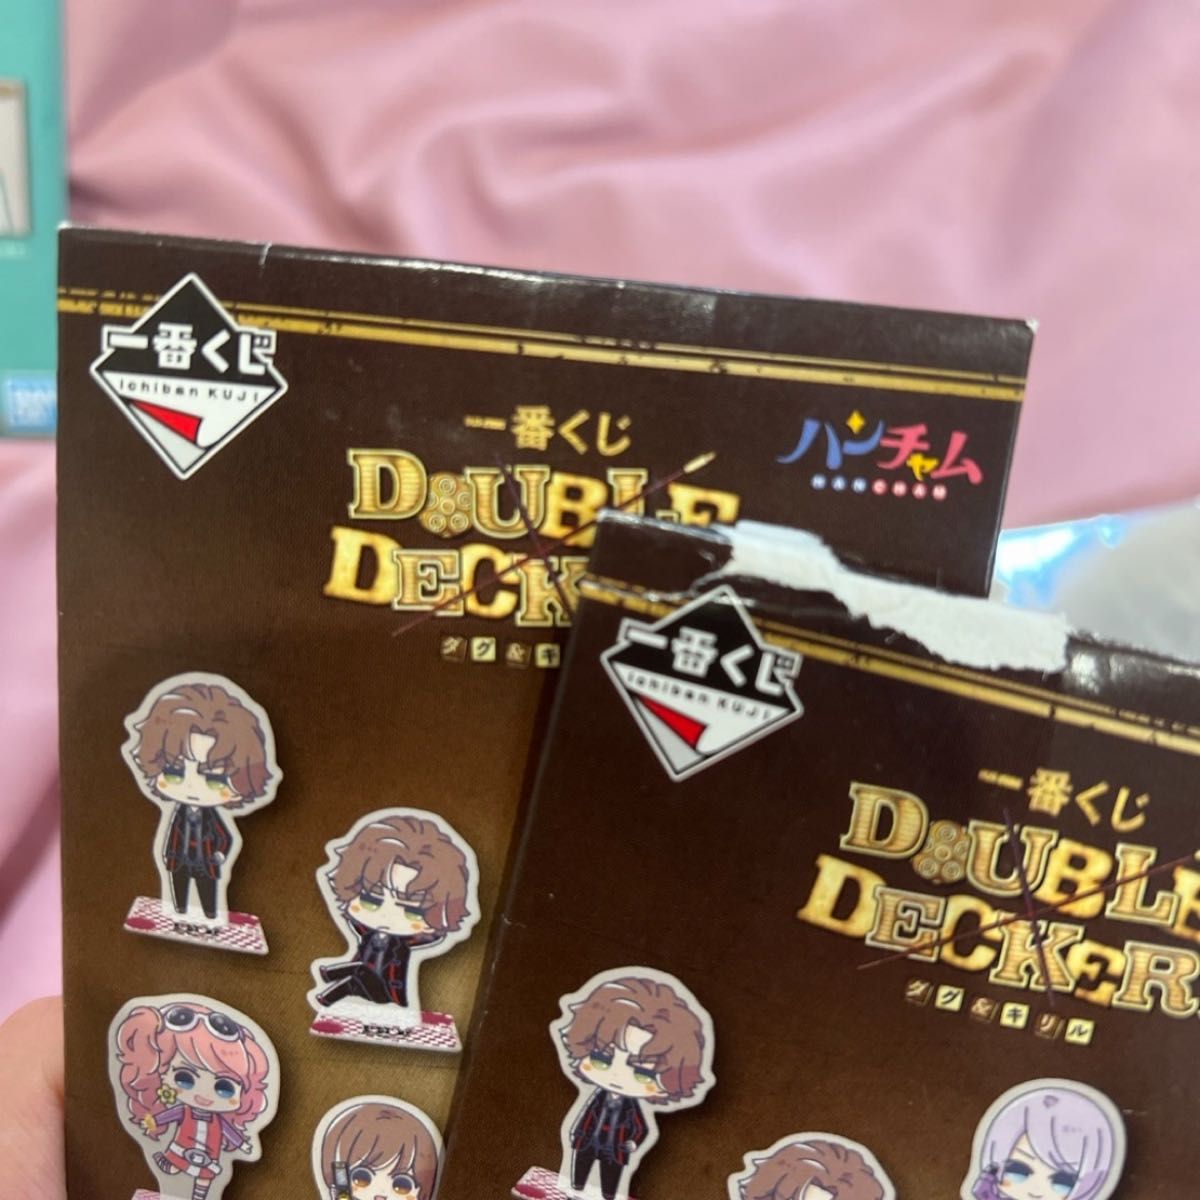 DOUBLE DECKER! ダグ＆キリル グッズ 6点セット 即購入大歓迎！